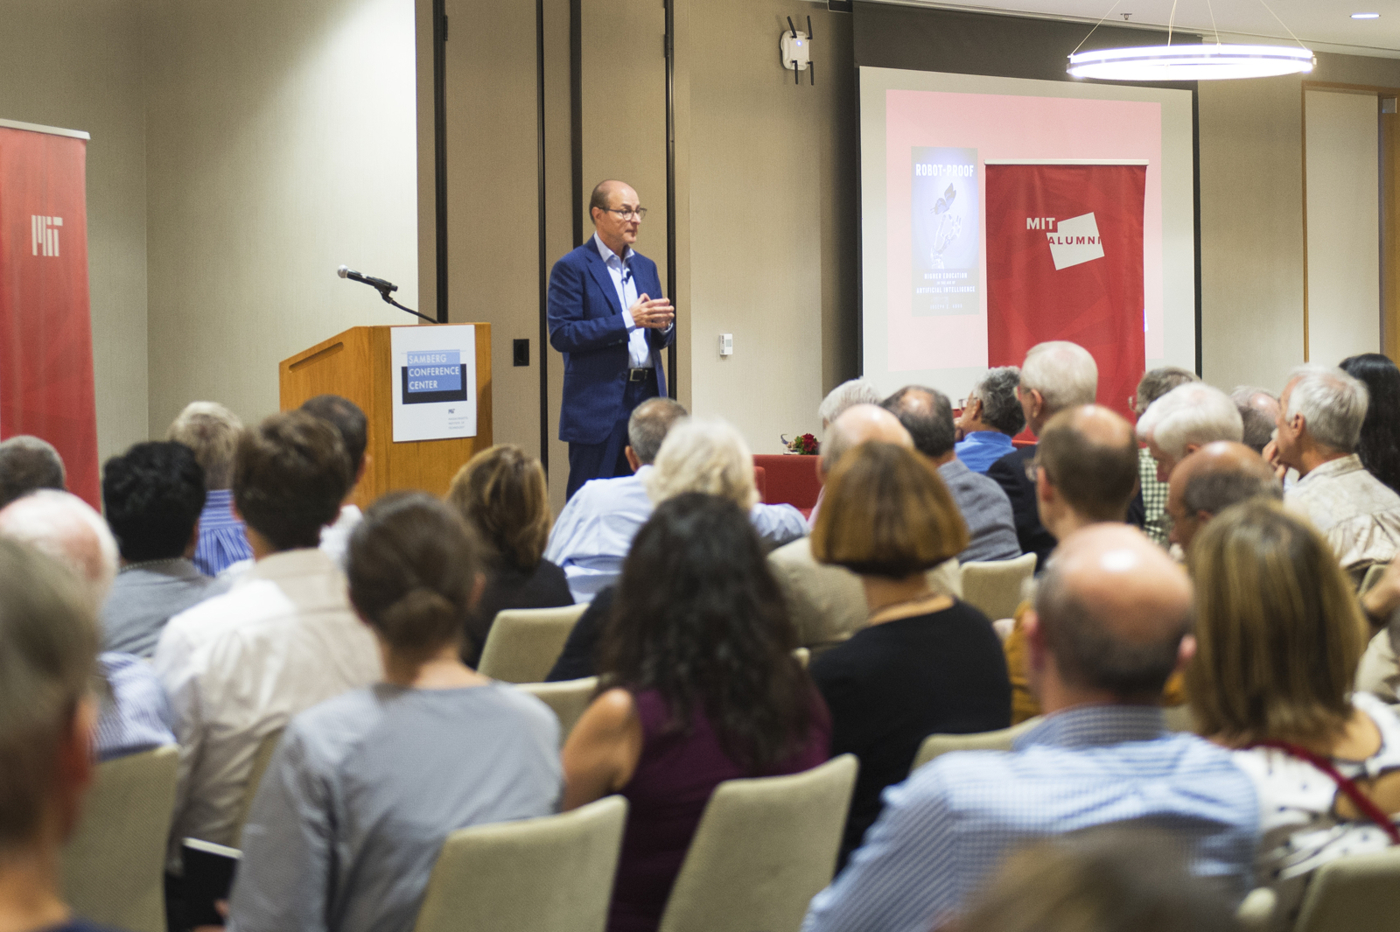 In a talk Tuesday night at the Massachusetts Institute of Technology, Northeastern President Joseph E. Aoun said everyone in the audience would one day find their jobs obsolete—unless they dedicate themselves to lifelong learning. Photo by Adam Glanzman/Northeastern University